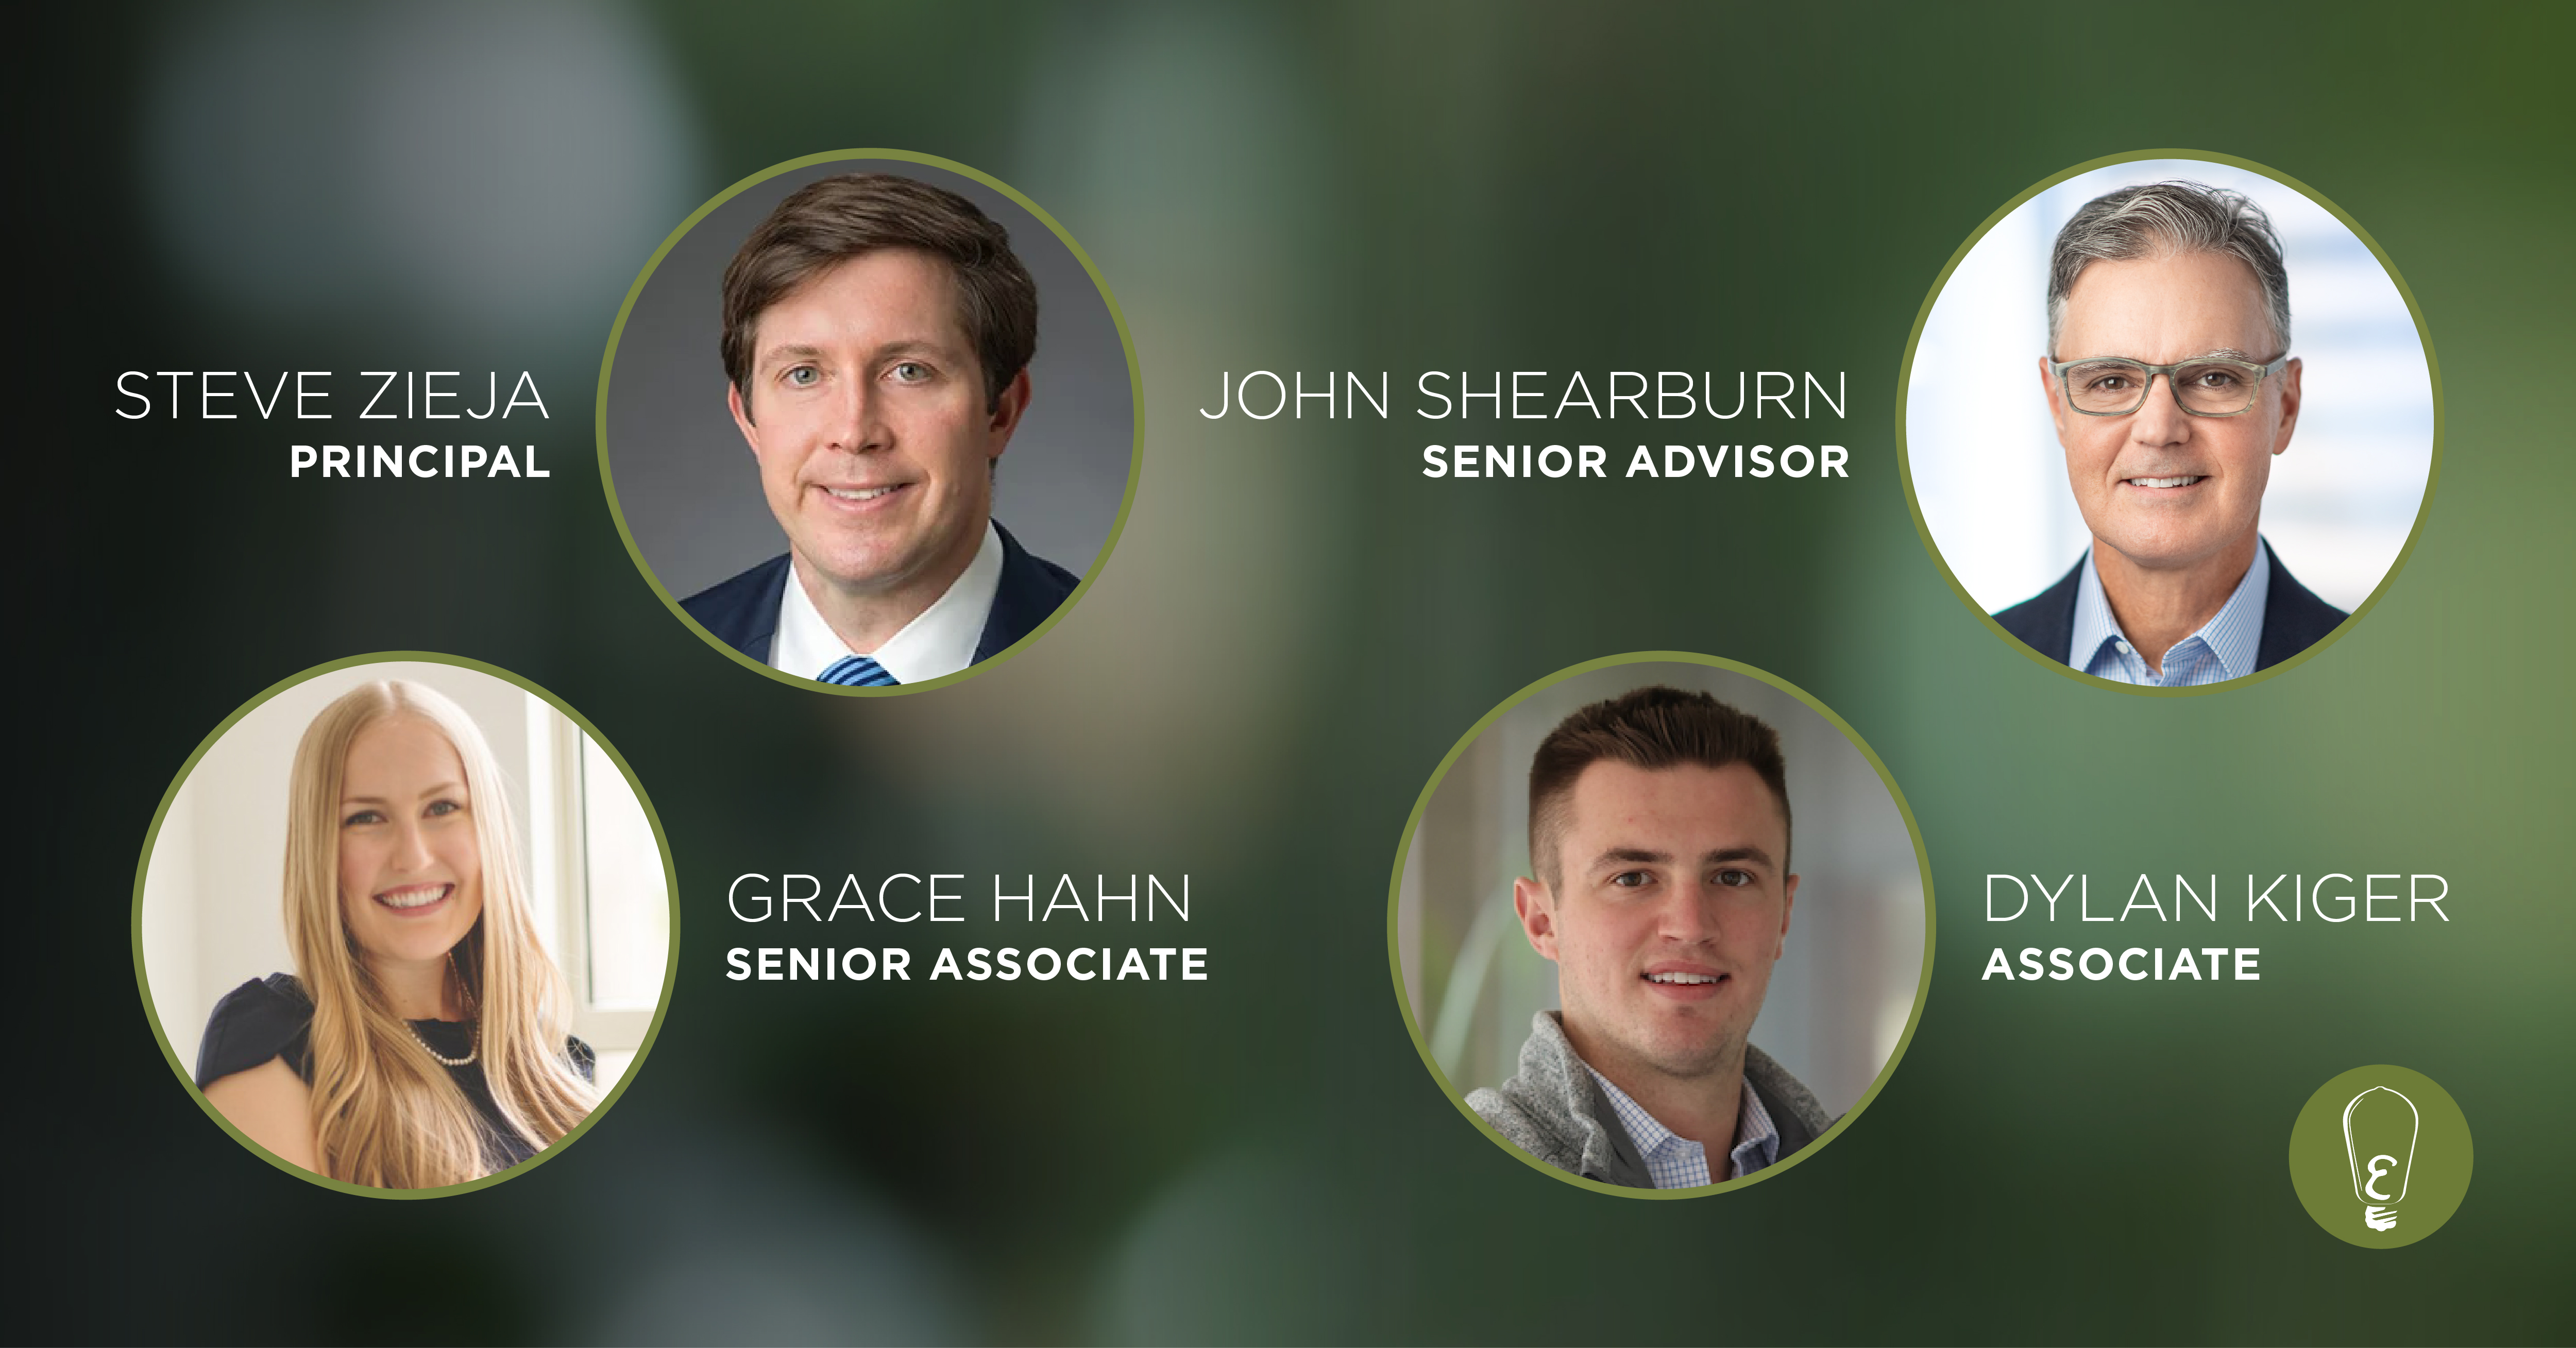 Edison Partners Continues to Invest in Its Future With Three Promotions and the Appointment of John Shearburn as Senior Advisor